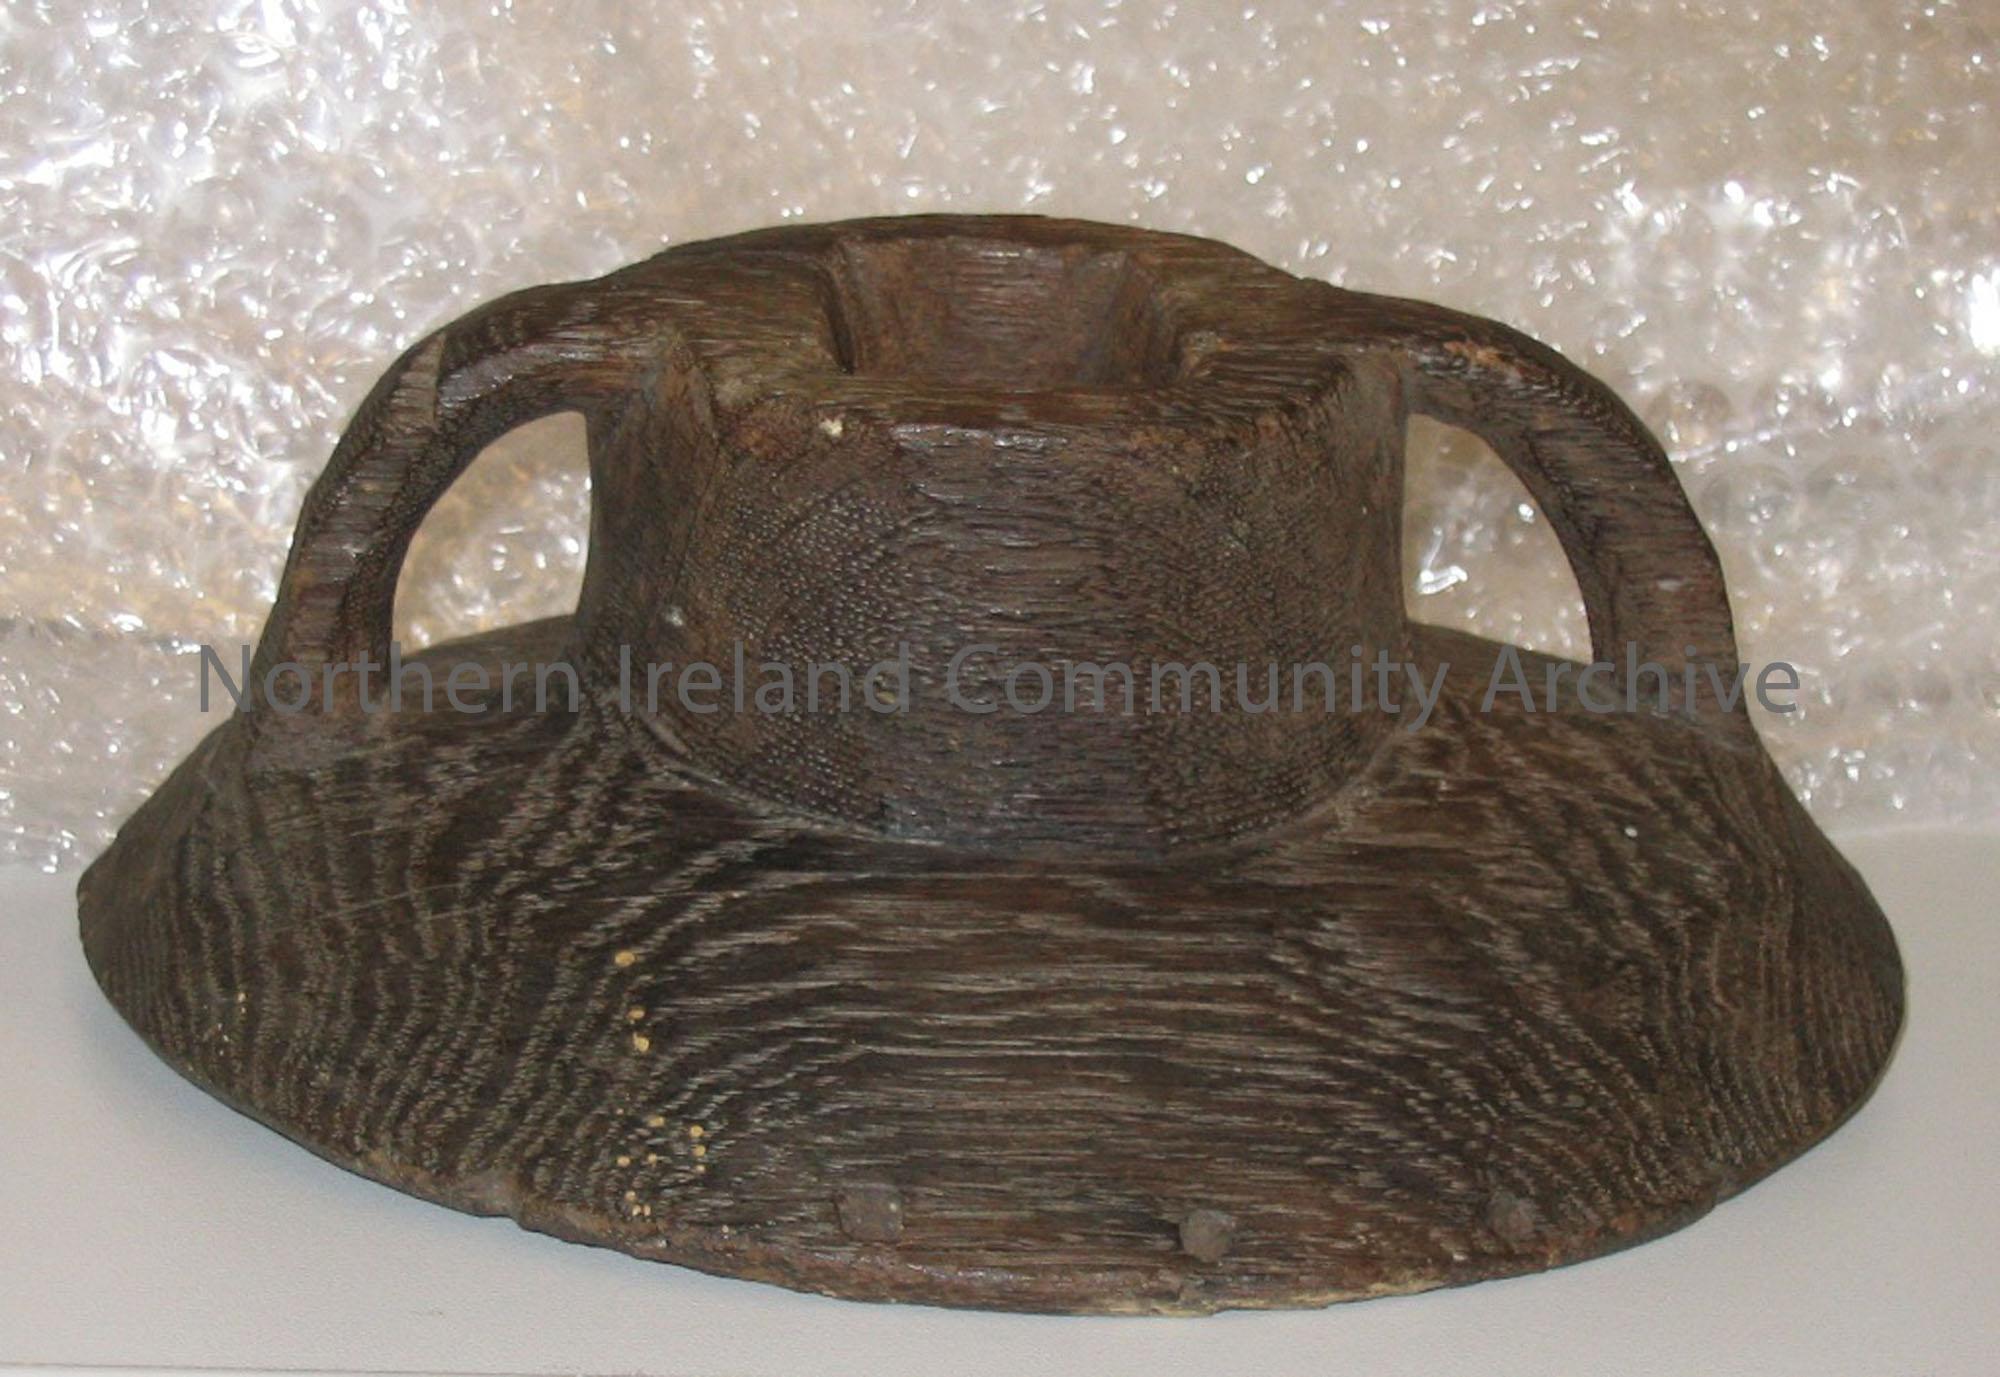 Vessel lid. Circular base with round neck and two handles joined to base and neck.There is a square hole pierced through the neck and base.